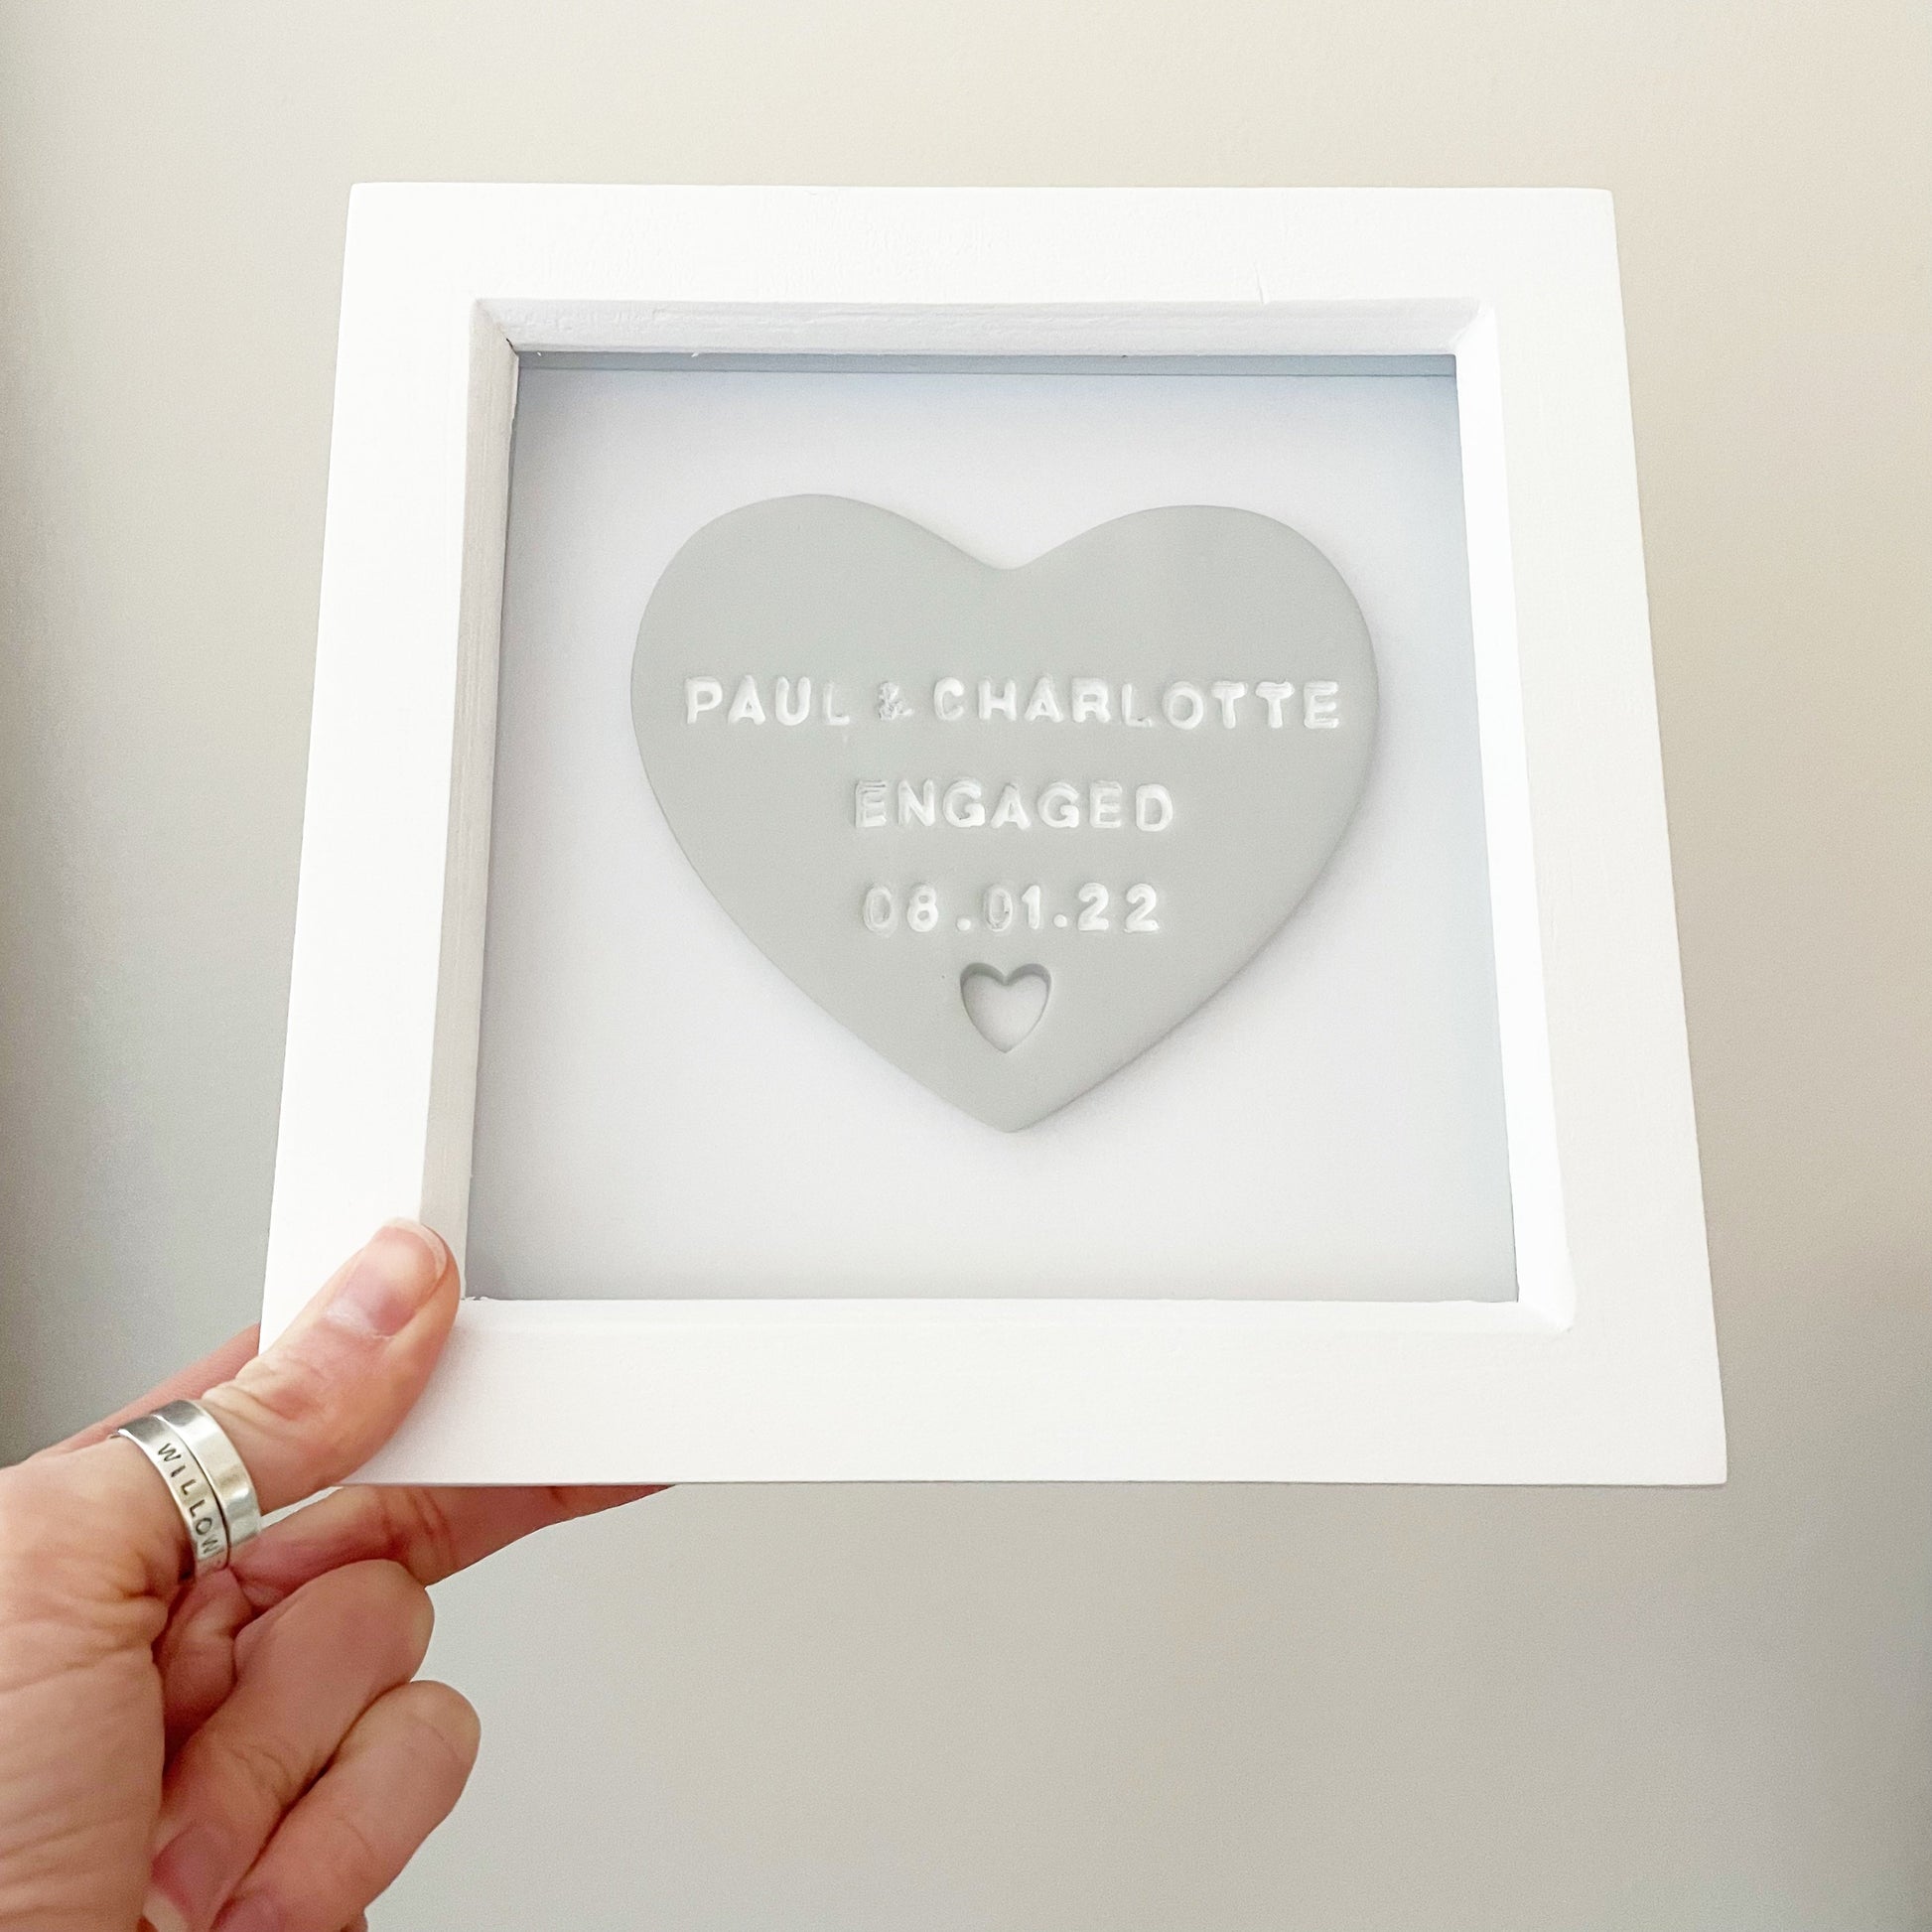 Personalised engagement gift, grey clay heart with a heart cut out at the bottom in a white box frame, the heart is personalised with PAUL & CHARLOTTE ENGAGED 08.01.22